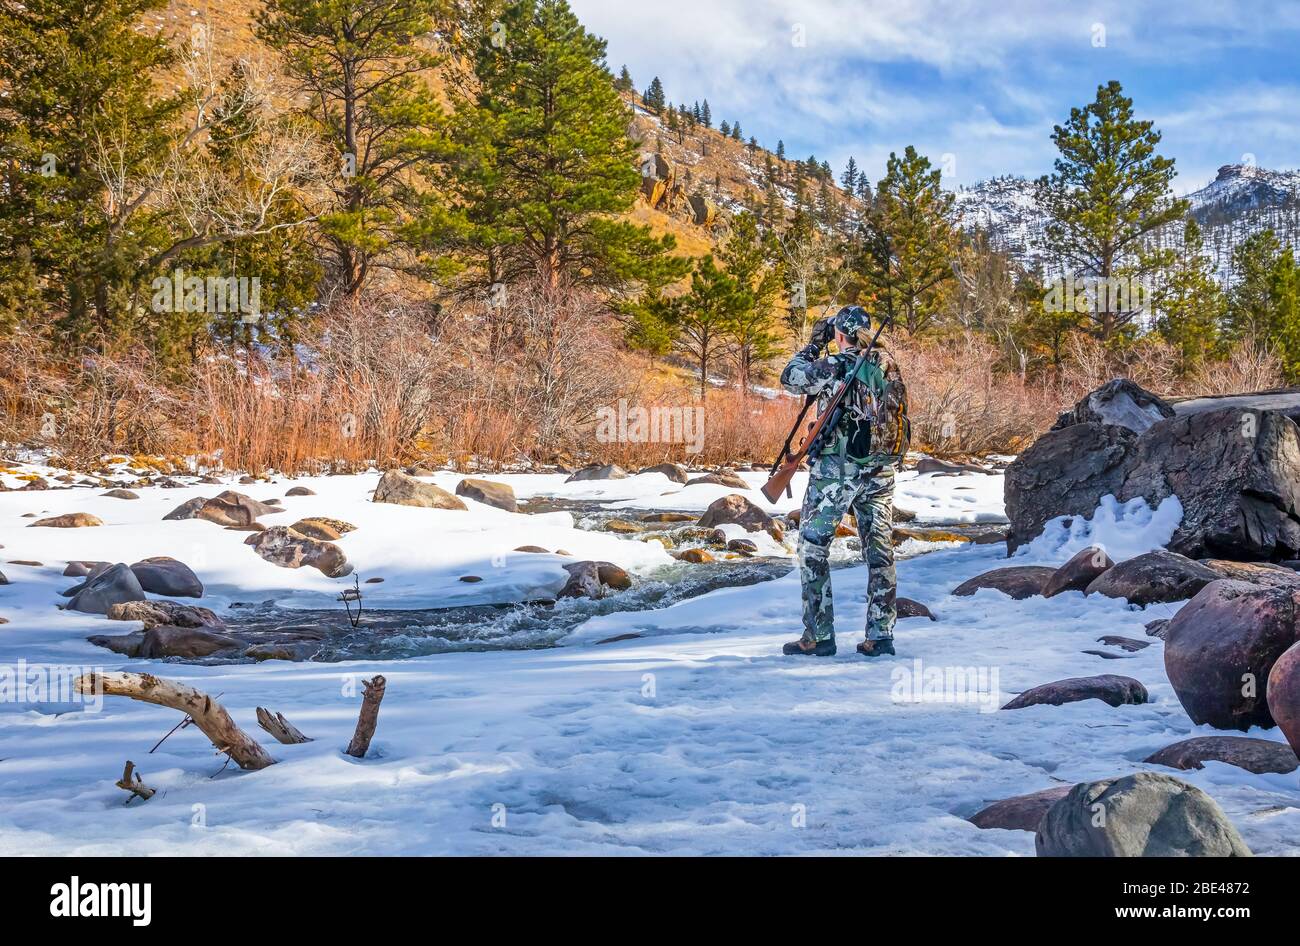 Hunter with camouflage clothing and rifle looking out with binoculars; Denver, Colorado, United States of America Stock Photo